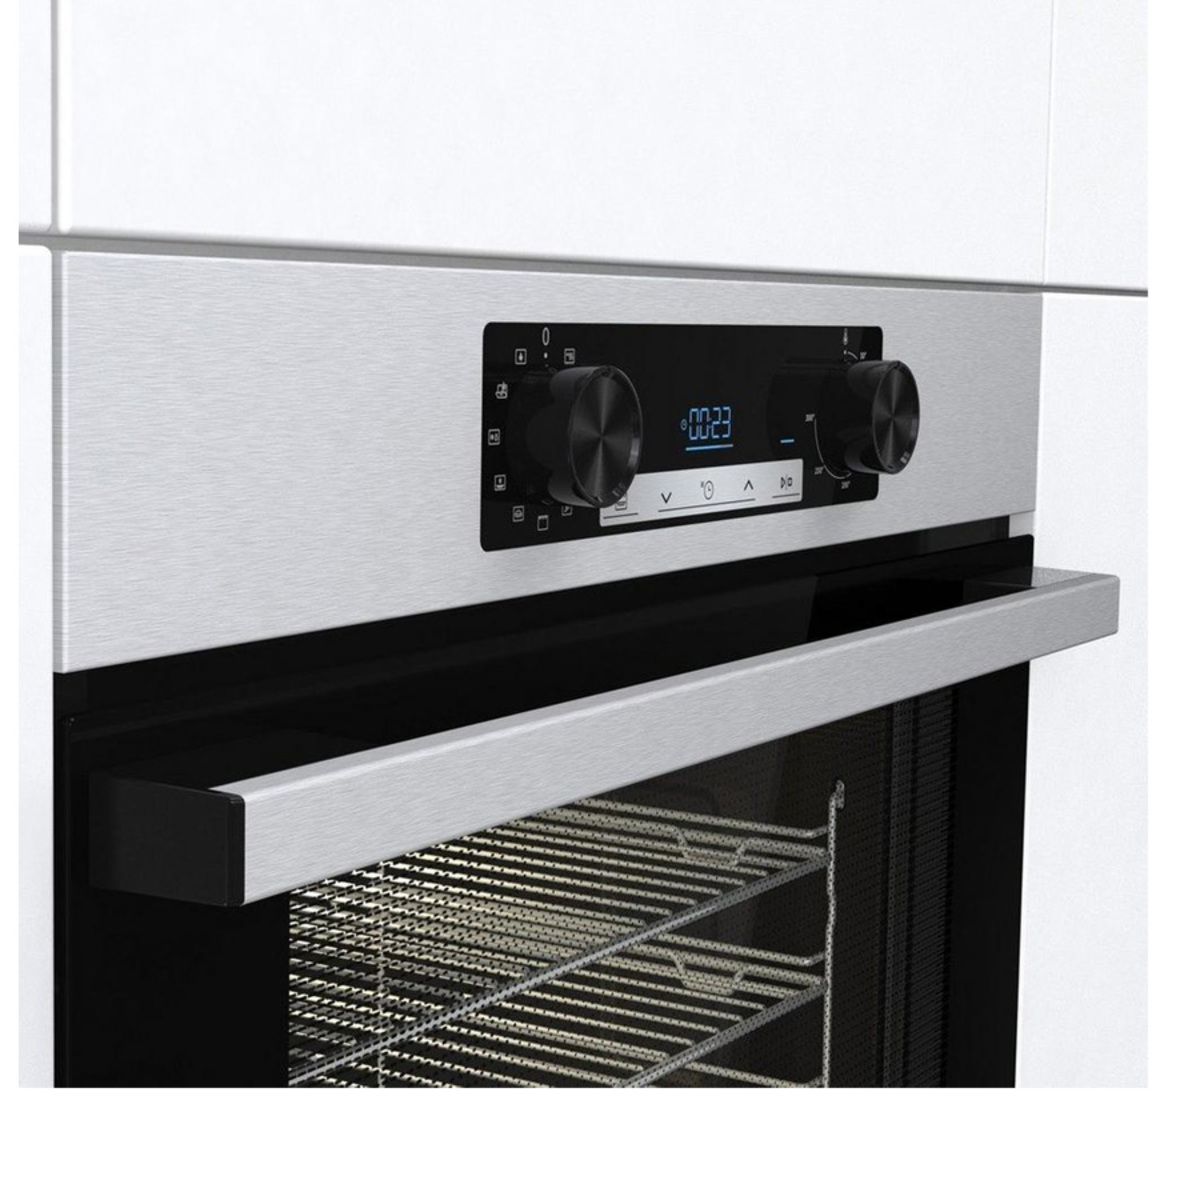 Hisense BI62212AXUK A Rated 77 Litre 60cm Built-in Single Electric Oven